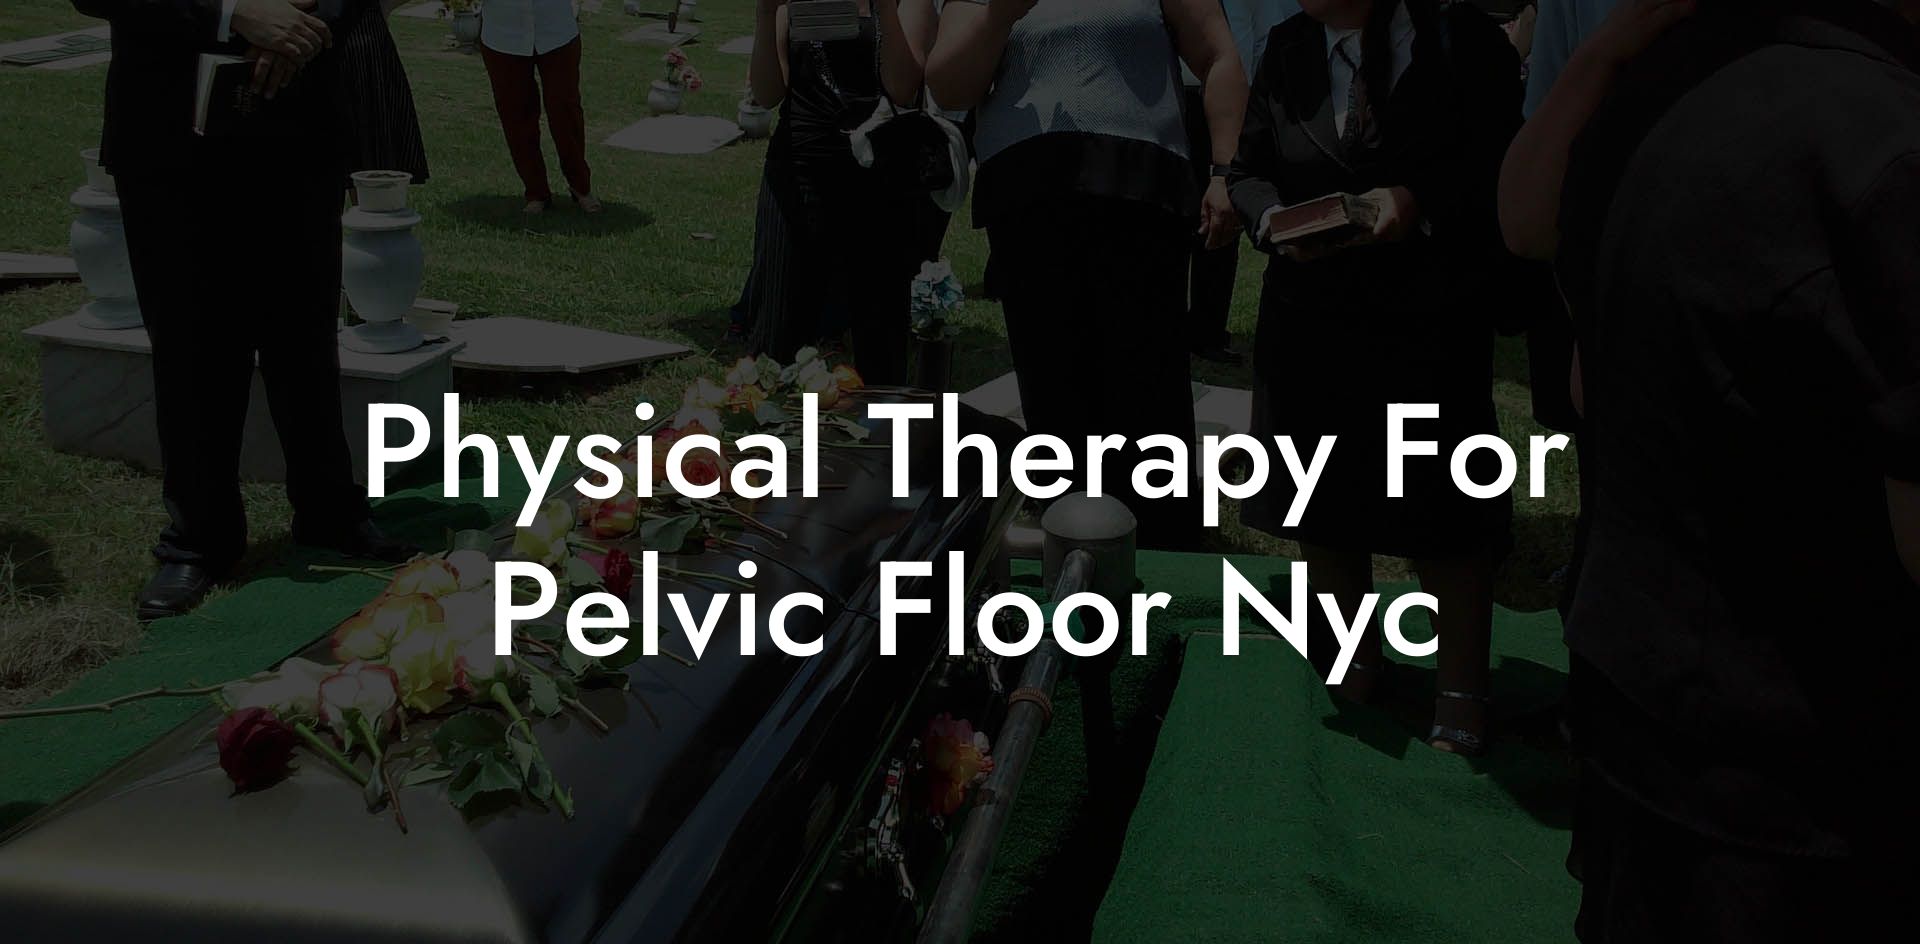 Physical Therapy For Pelvic Floor Nyc